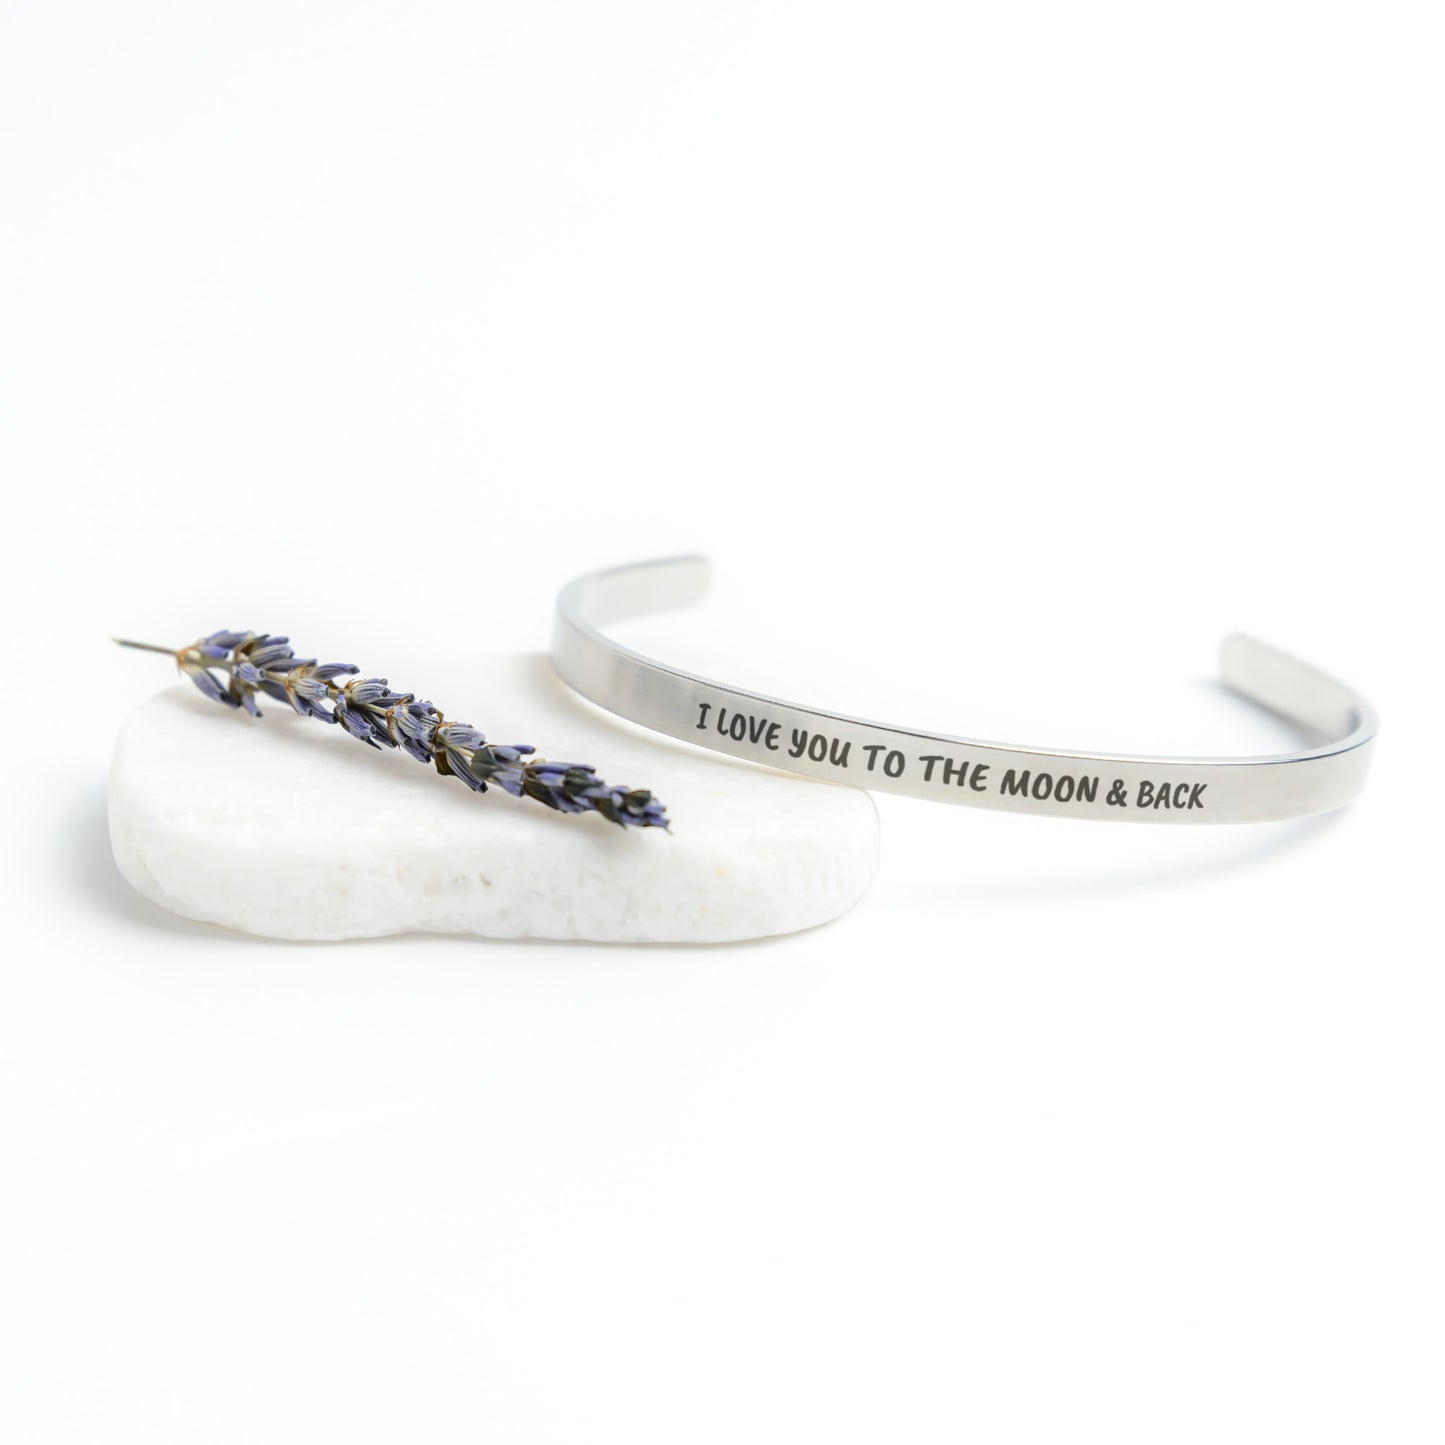 I Love You To The Moon & Back Cuff Bracelet